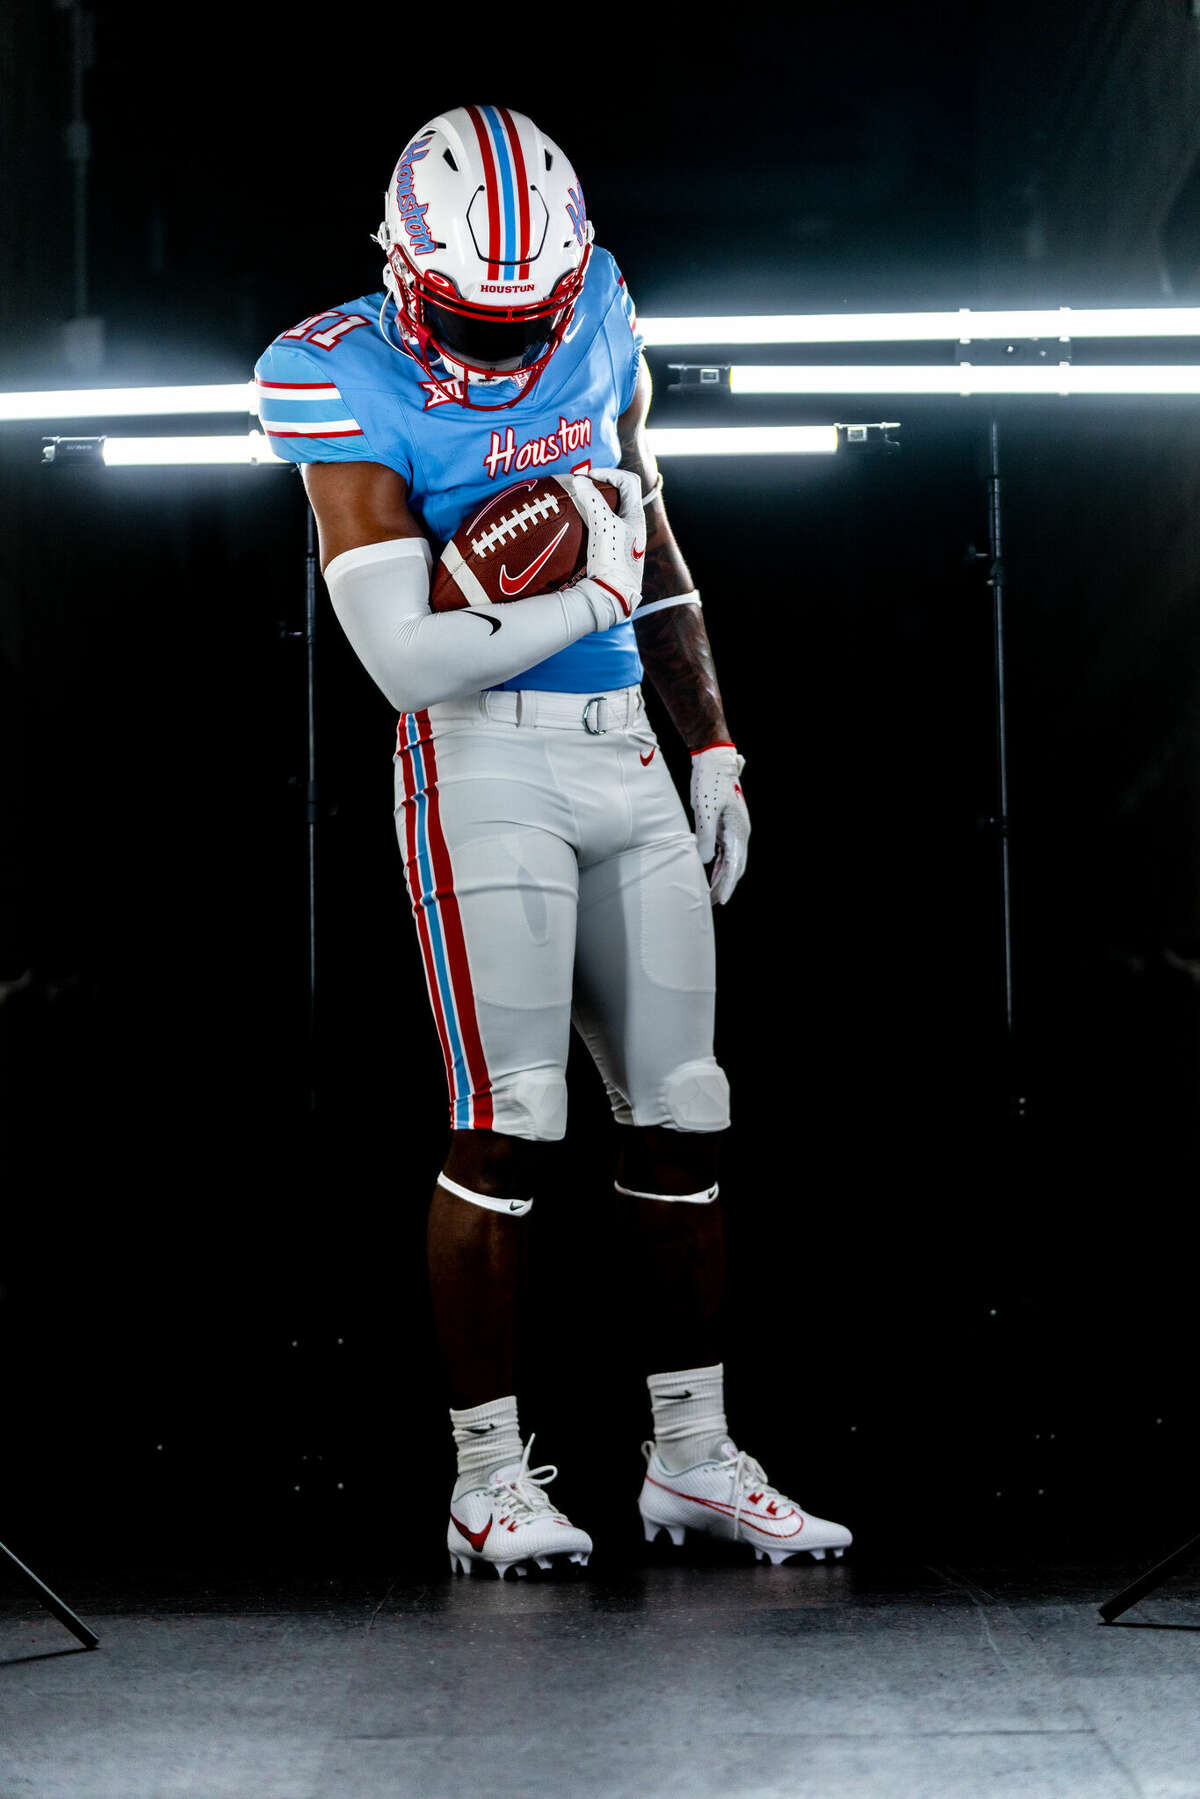 Hot] Buy New Houston Cougars Oilers Themed Jersey